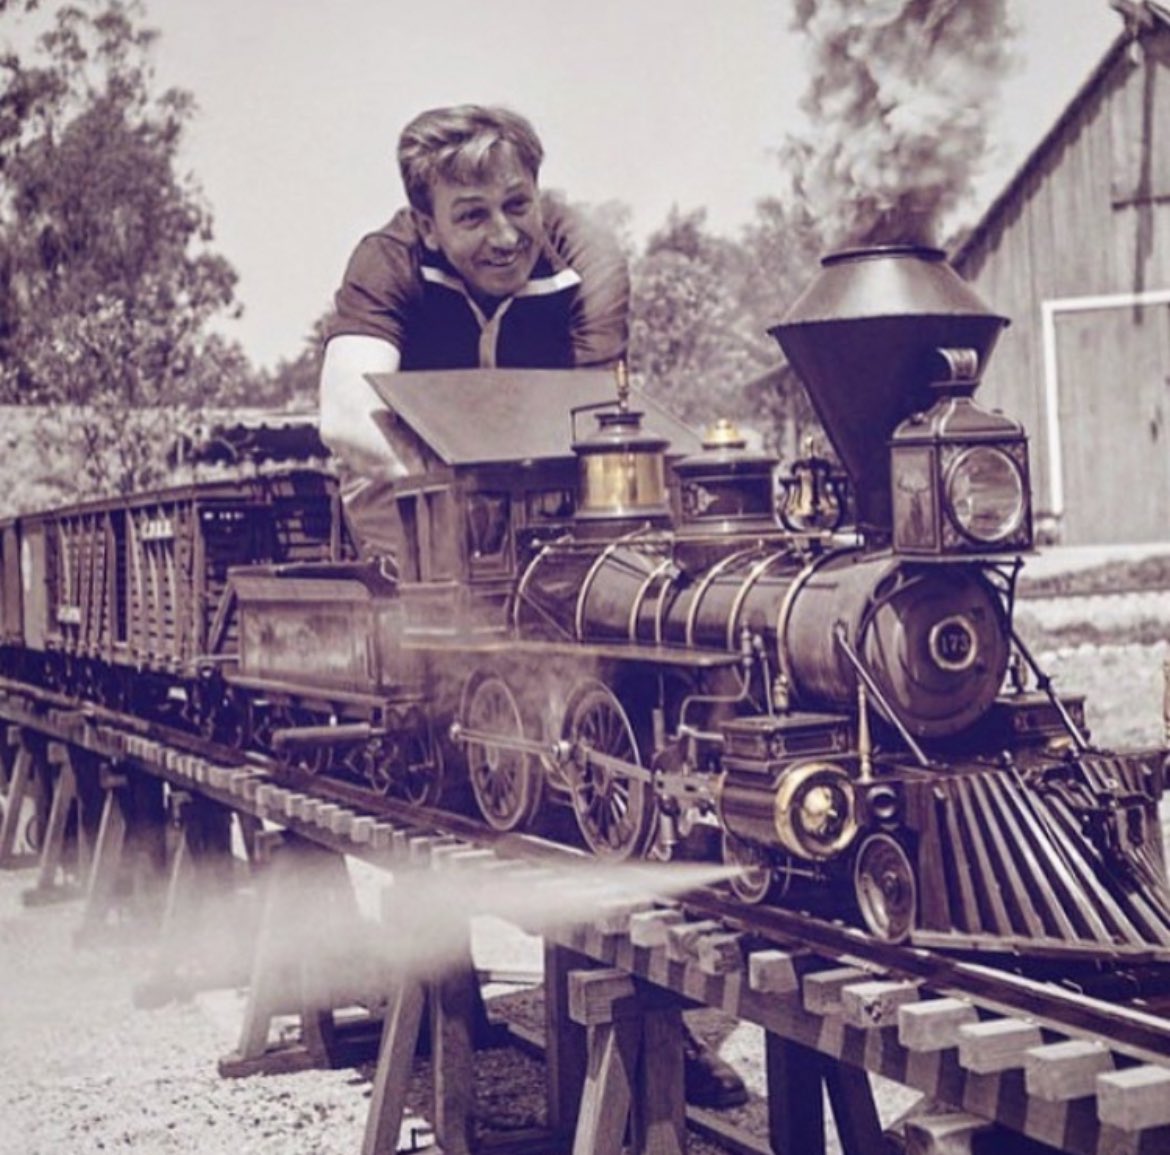 #Disney #SS #BIWW @Disney - May 7 1950 Walt Disney runs the first steam engine on his backyard “Carolwood Pacific Railroad”. Walt’s affection for trains prompts inclusion of around-the-park railroads at Disneyland and Walt Disney World. https://t.co/IcZNPM17VV